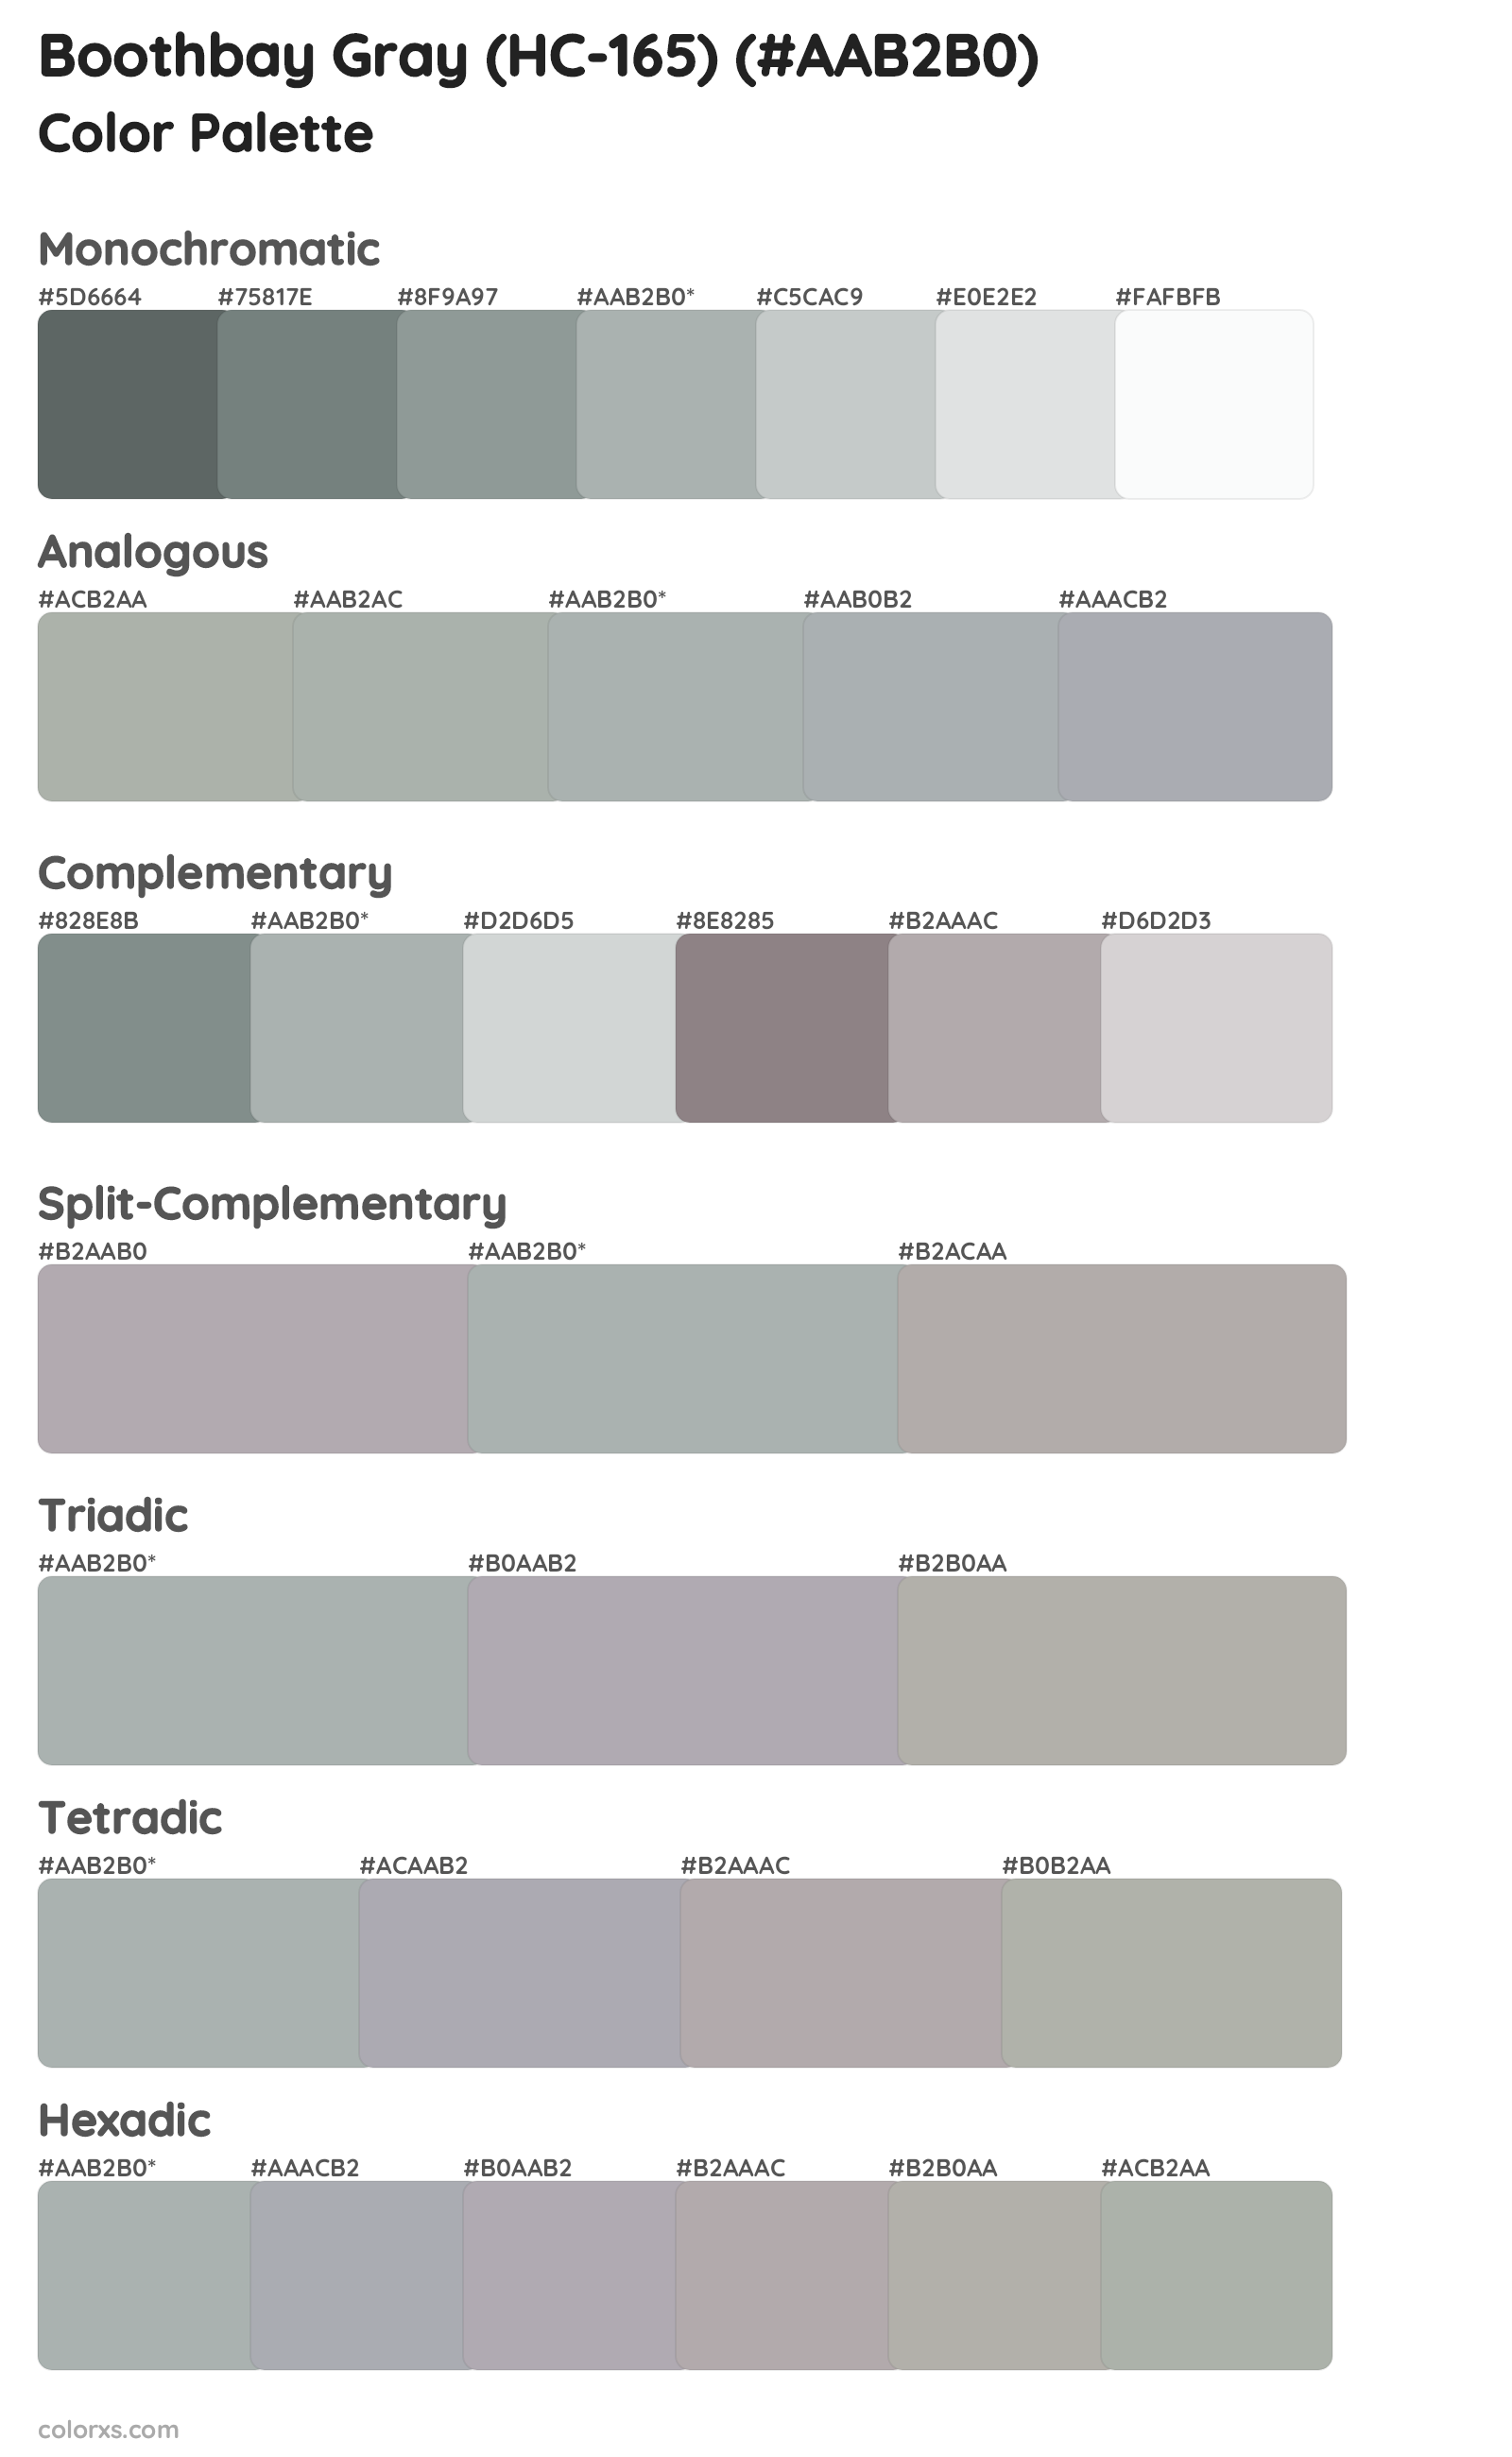 Boothbay Gray (HC-165) Color Scheme Palettes